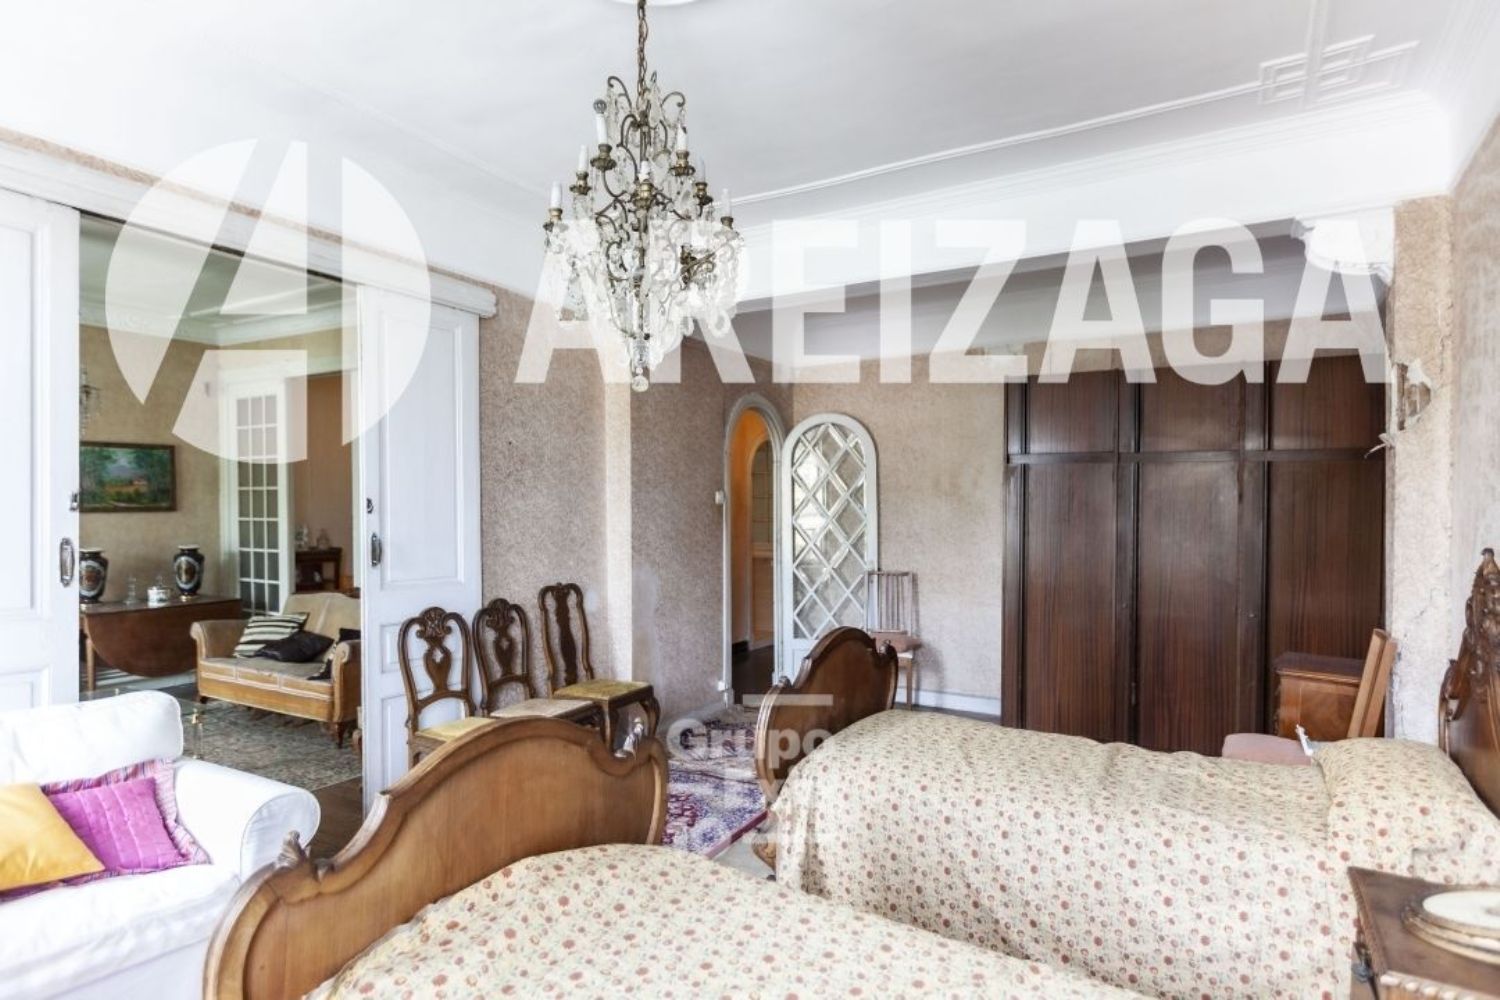 Apartment for sale on the seafront on Andia street, in Donostia-San Sebastian